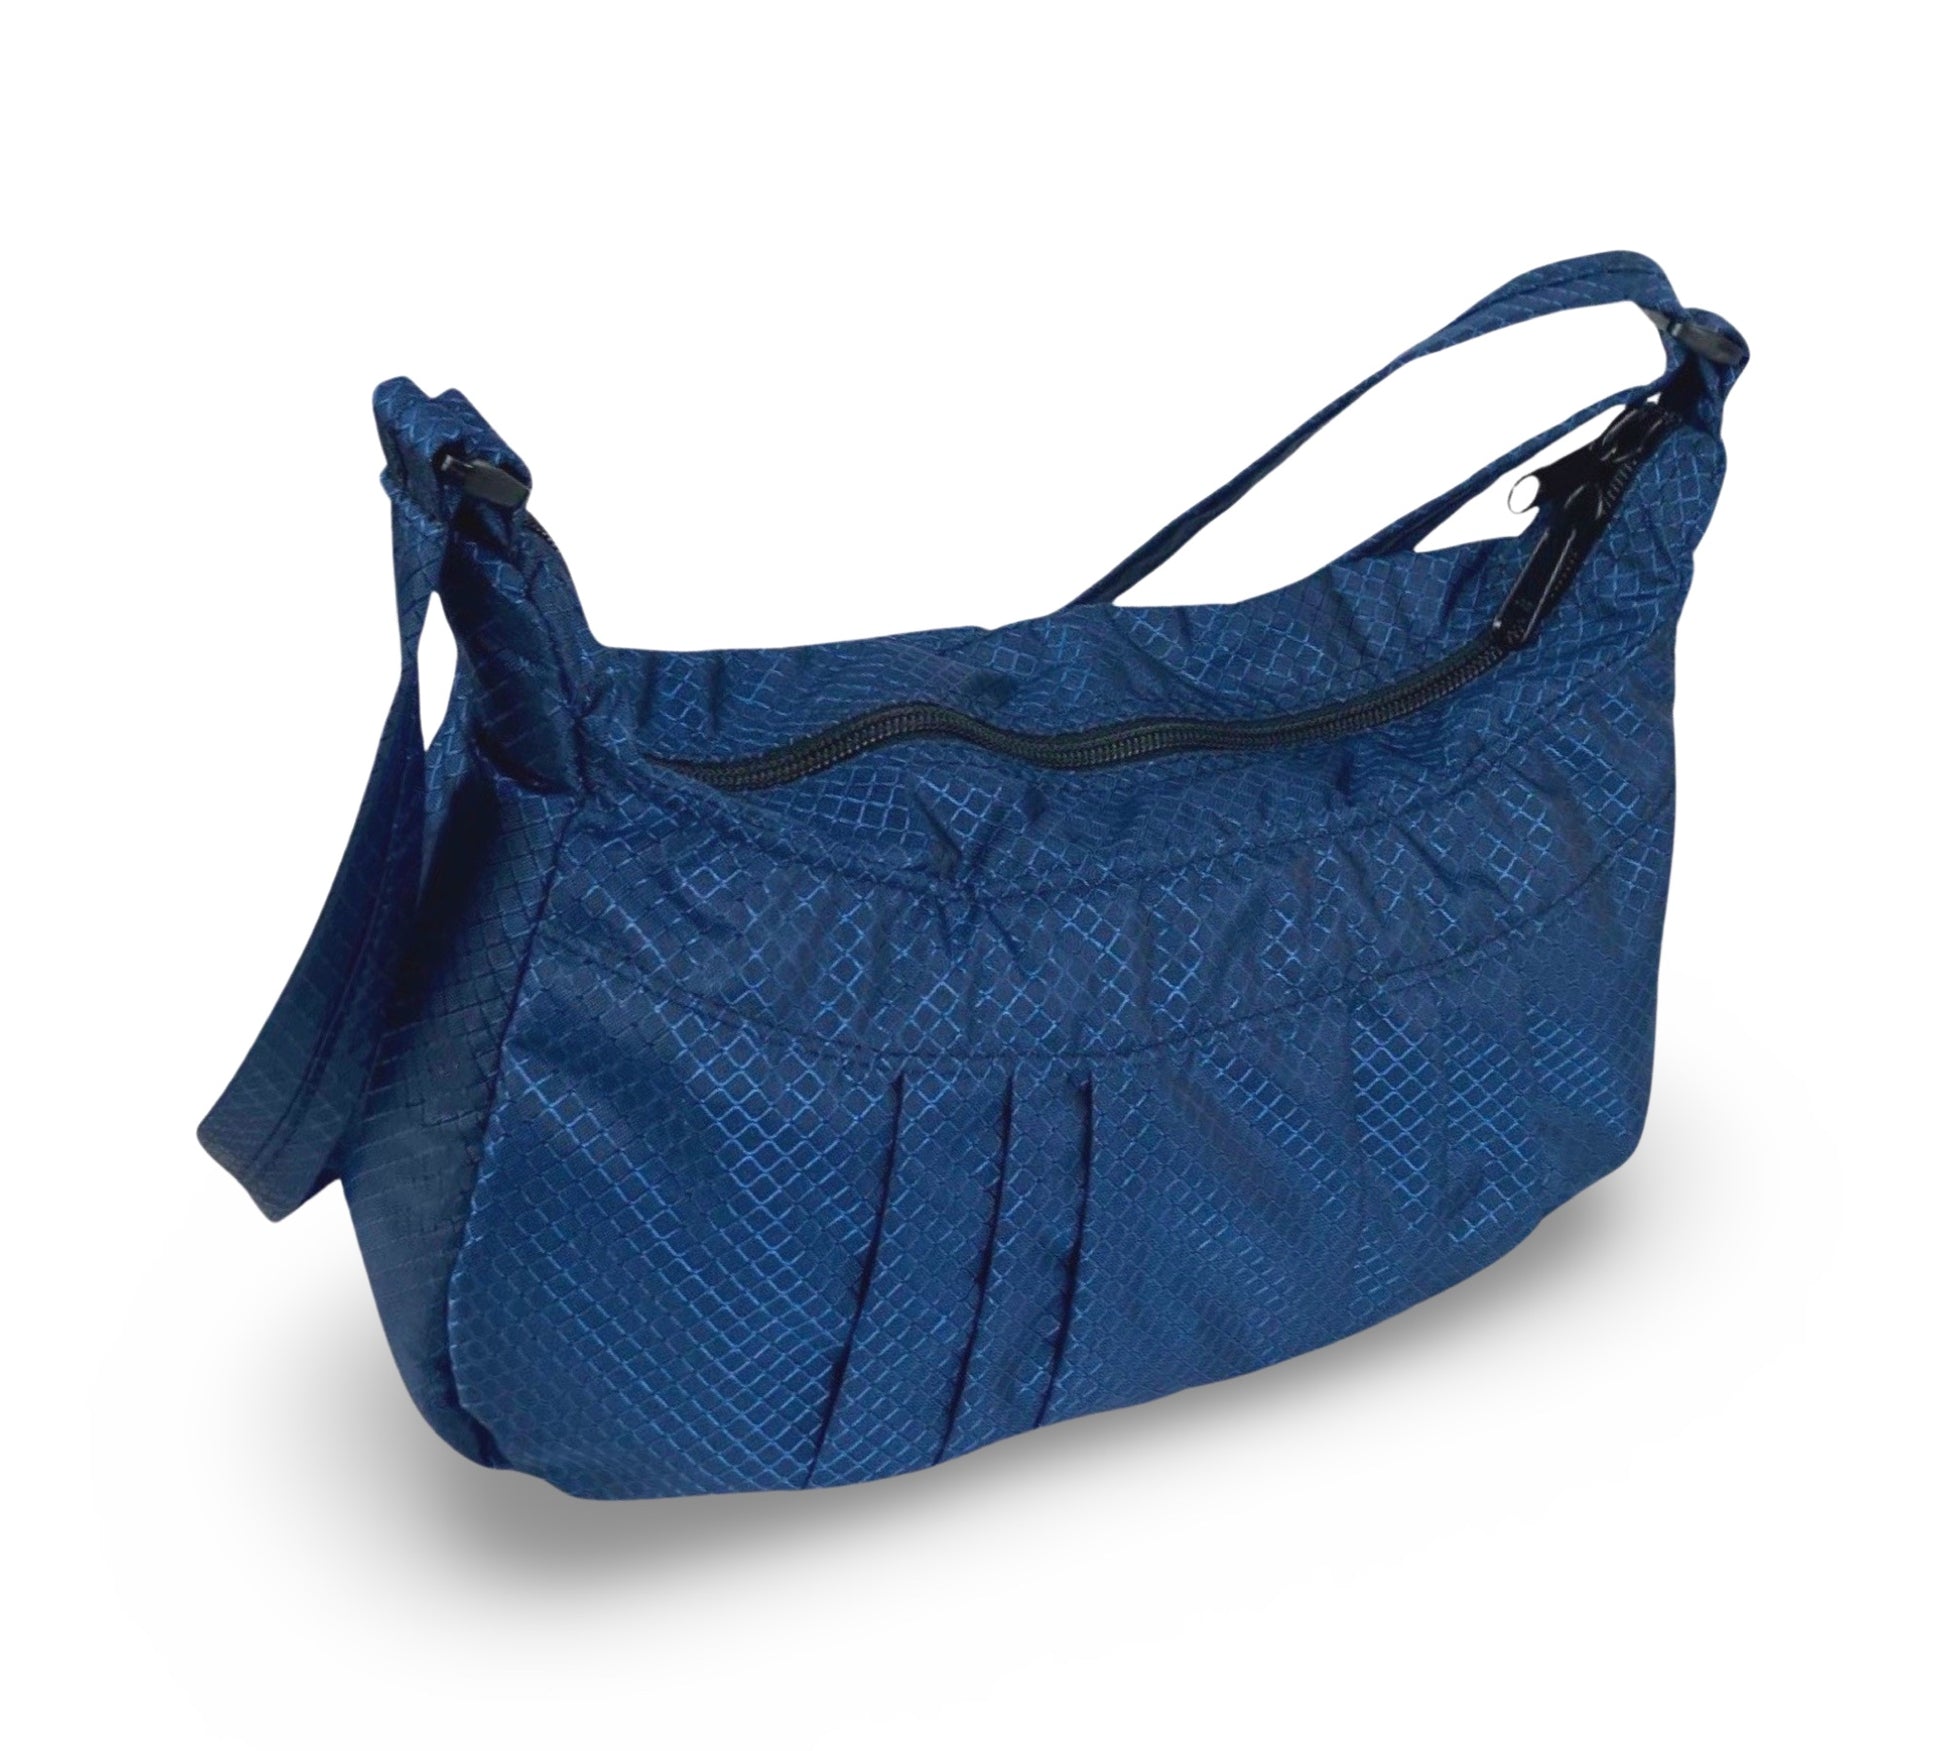 DIAMOND PURSE Shoulder Bags, by Tough Traveler. Made in USA since 1970